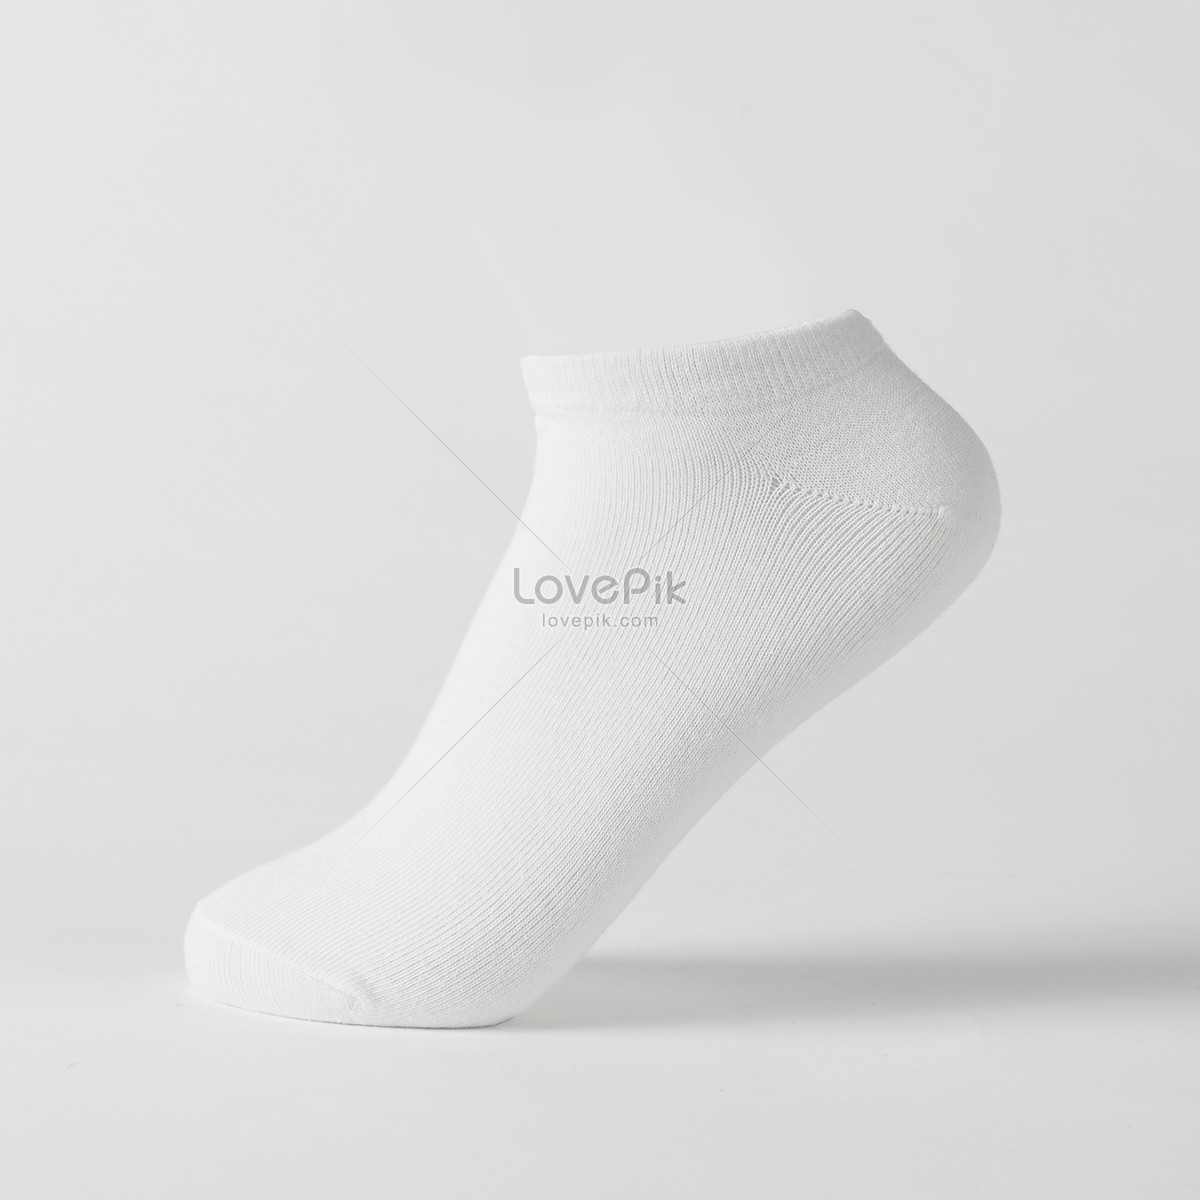 Mens Cotton Socks Picture And HD Photos | Free Download On Lovepik